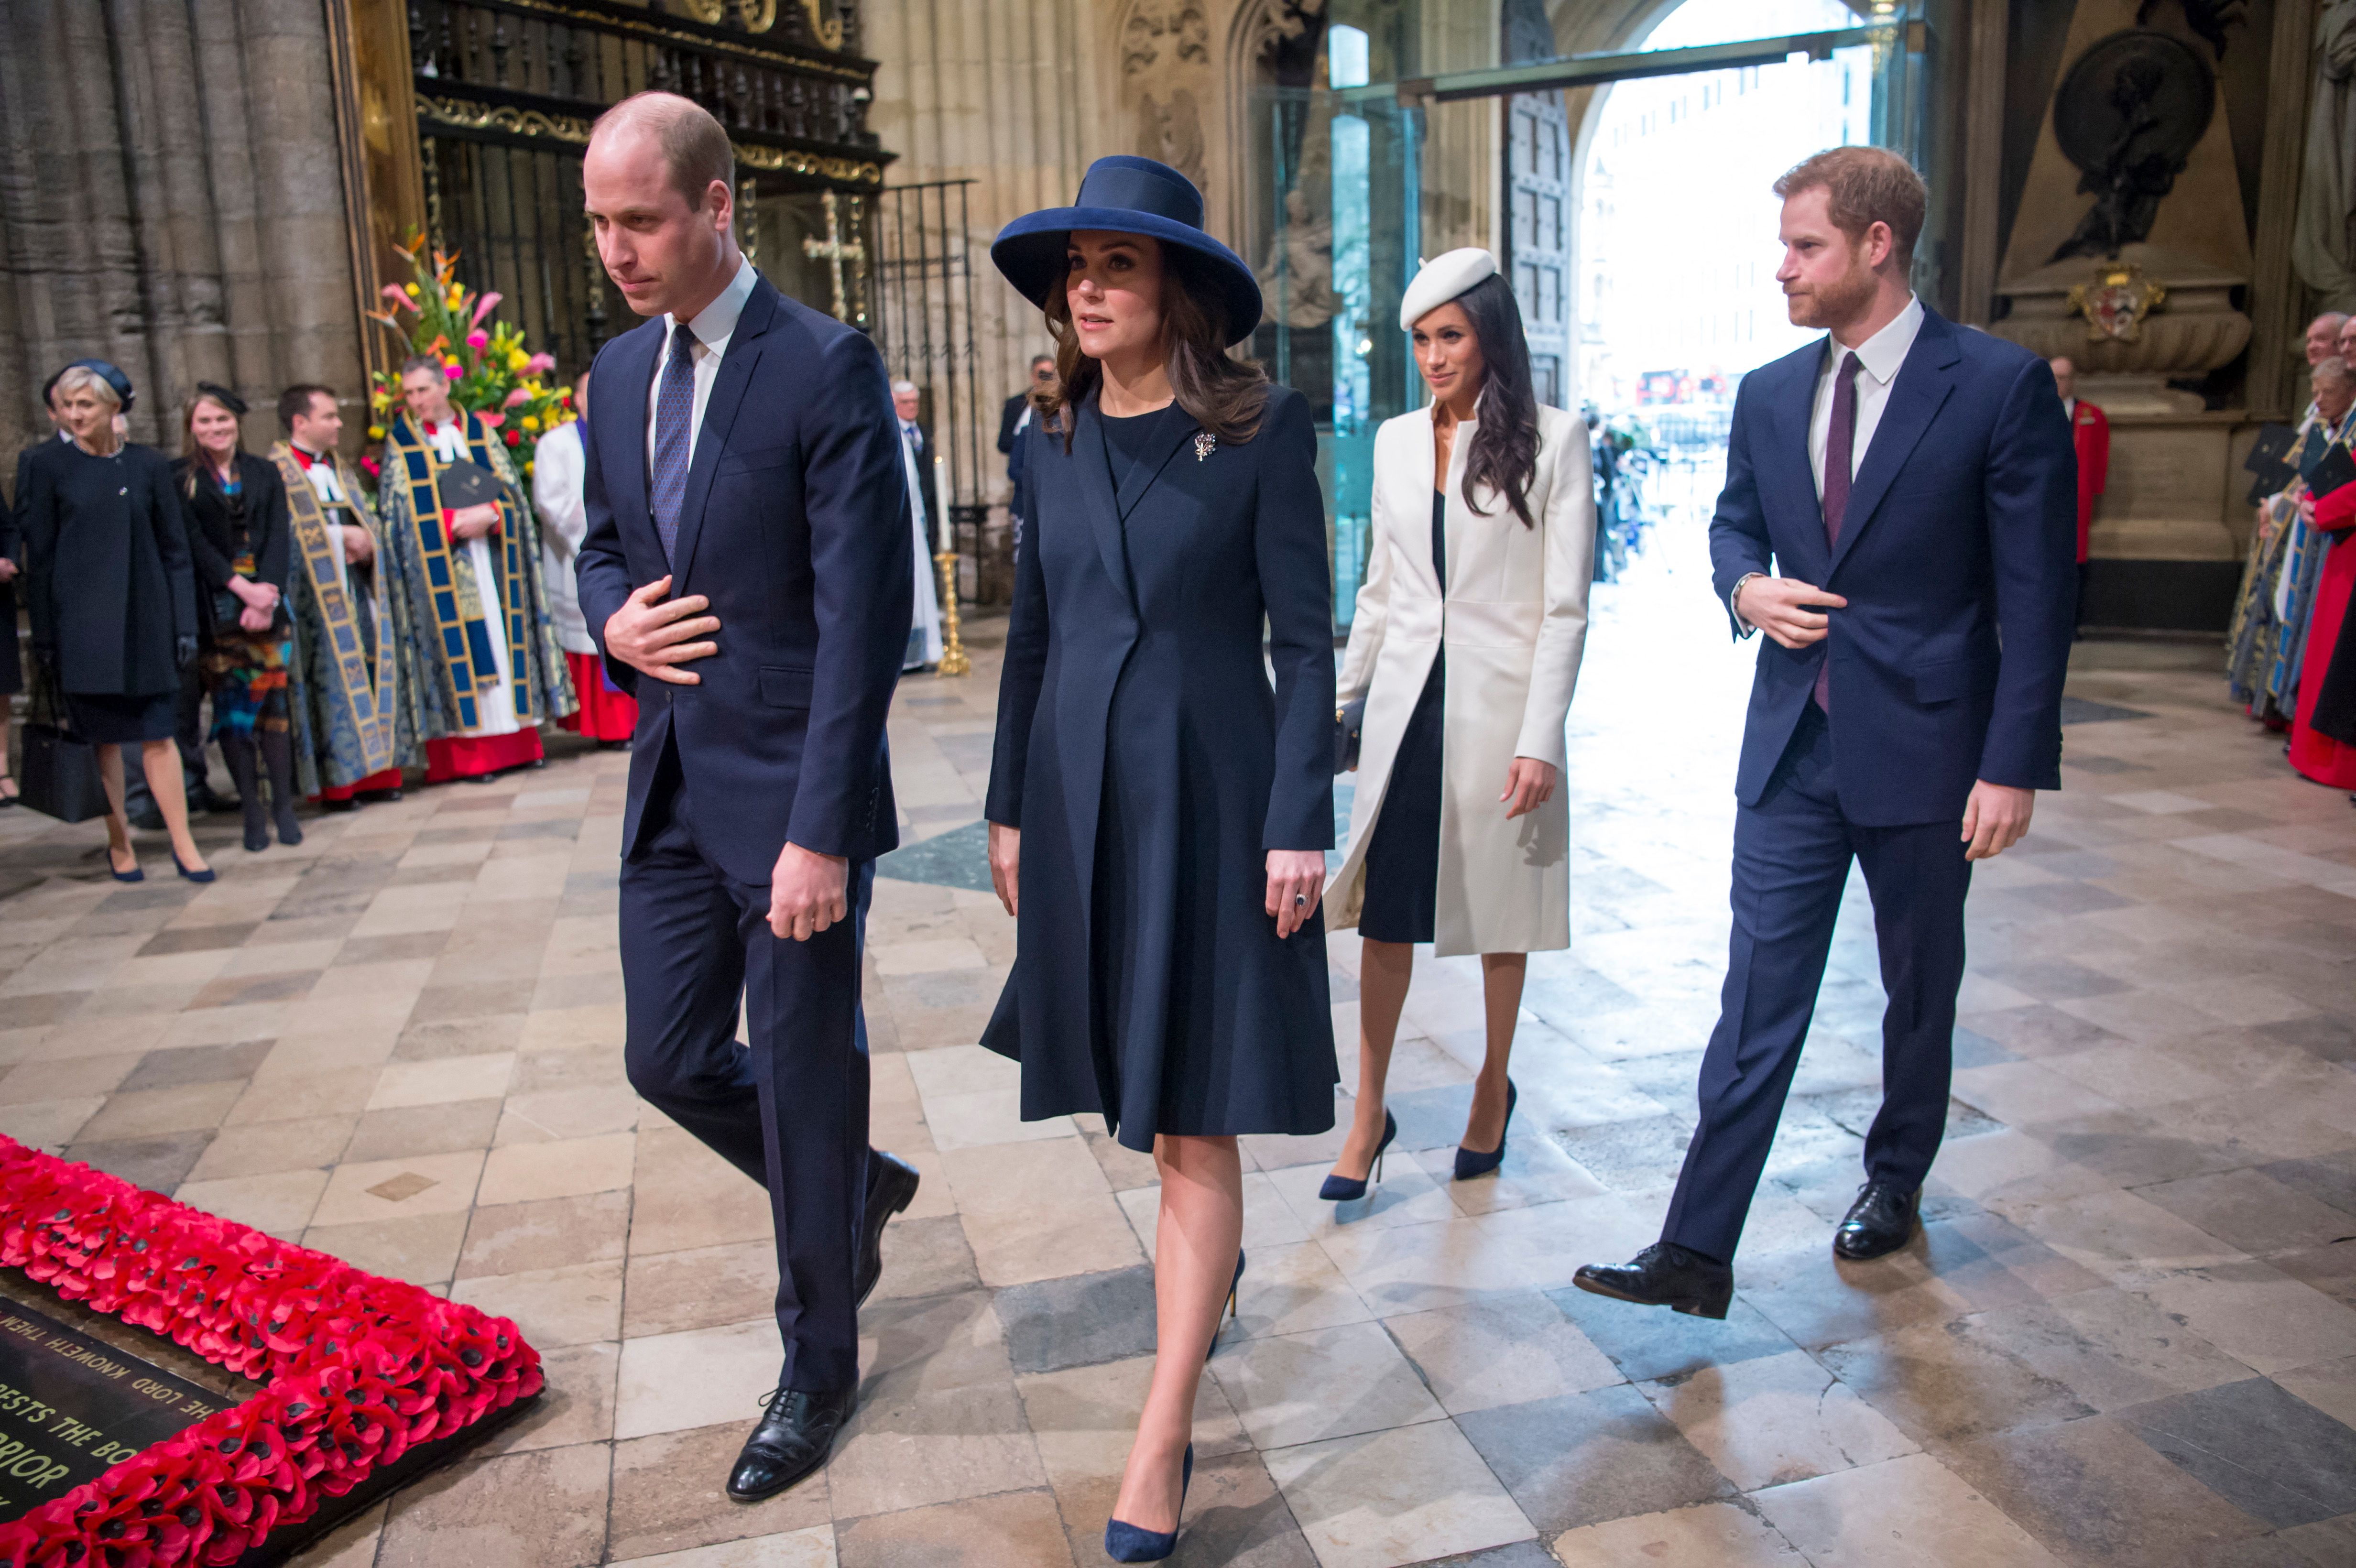 Prince William, Princess Catherine, Prince Harry, and Meghan Markle at the Commonwealth Day Service at Westminster Abbey in central London, on March 12, 2018 | Source: Getty Images